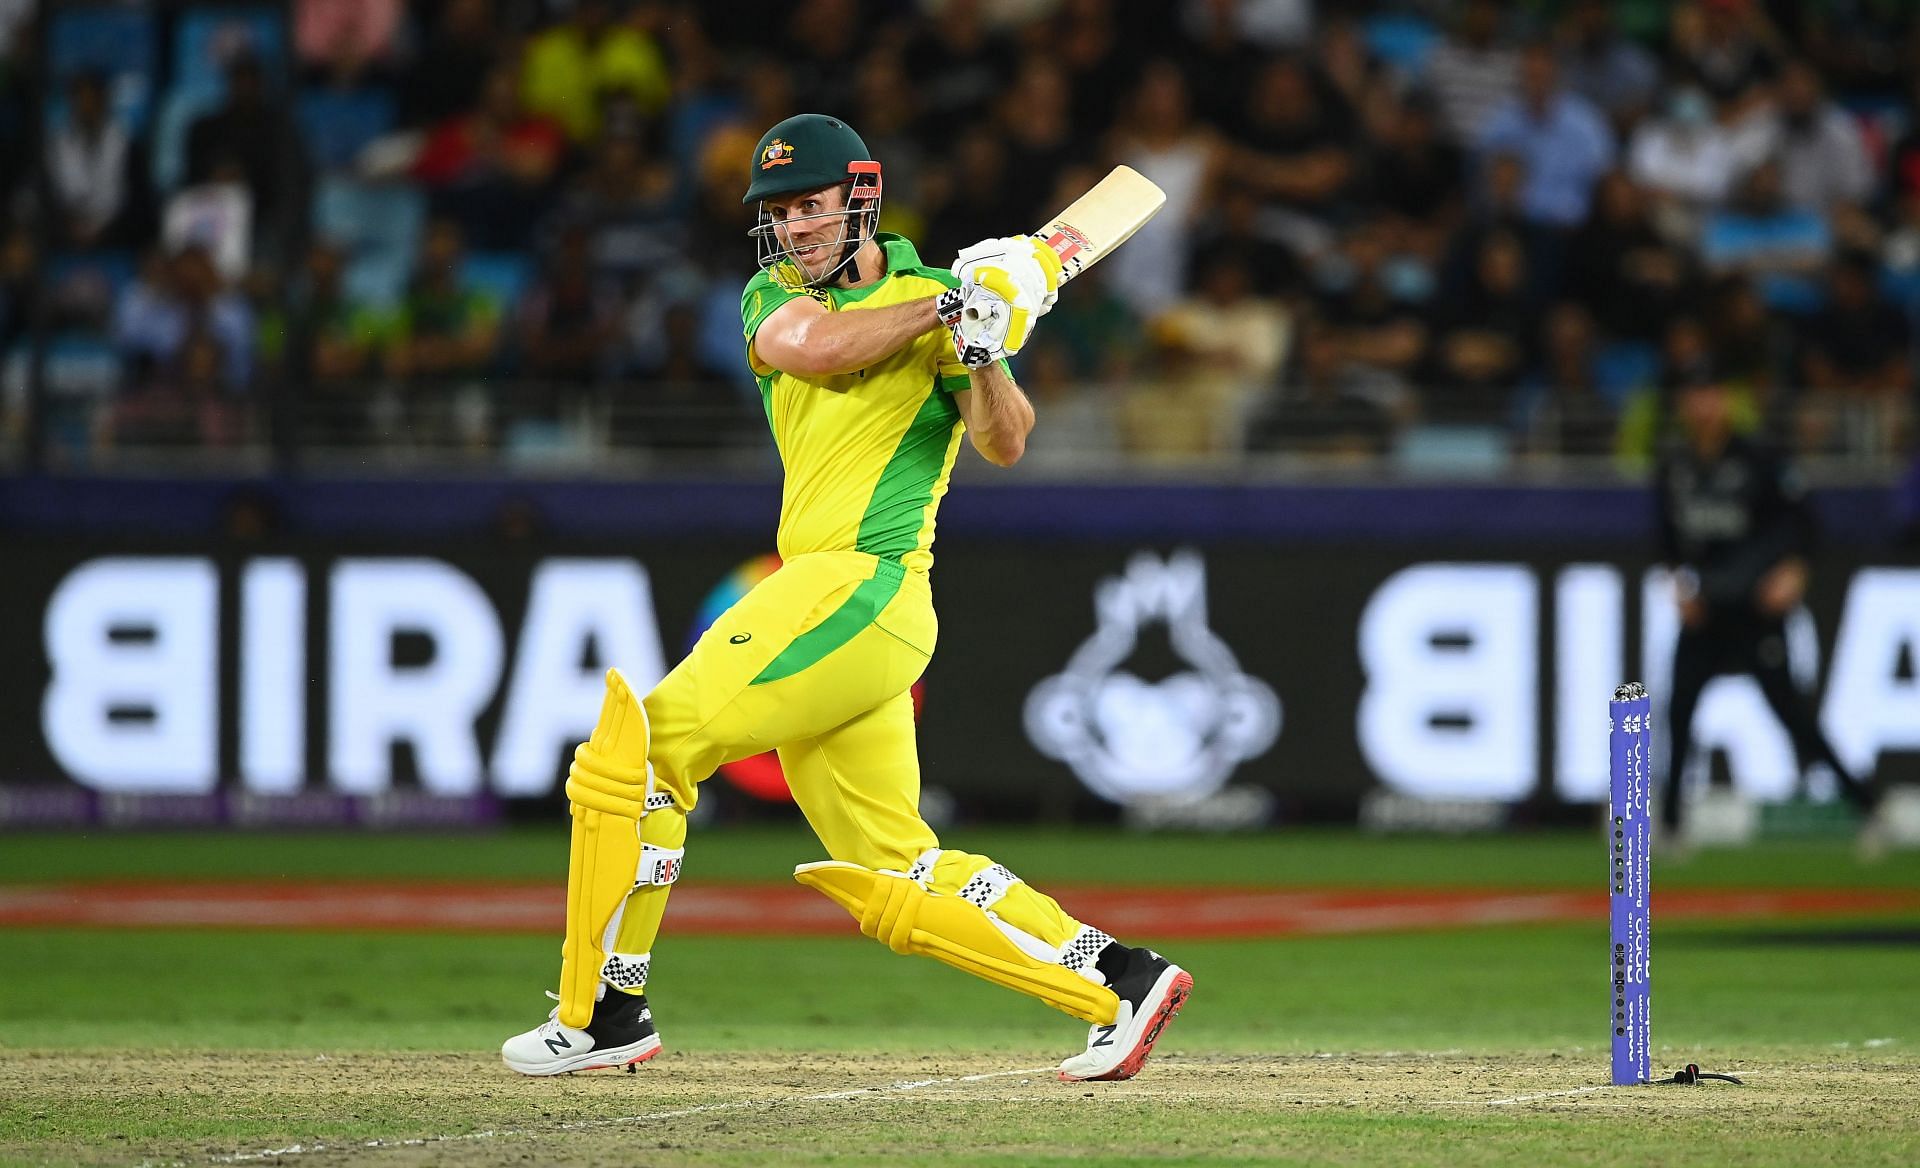 Mitchell Marsh has been exceptional for Australia at number 3 (Credits: Getty)